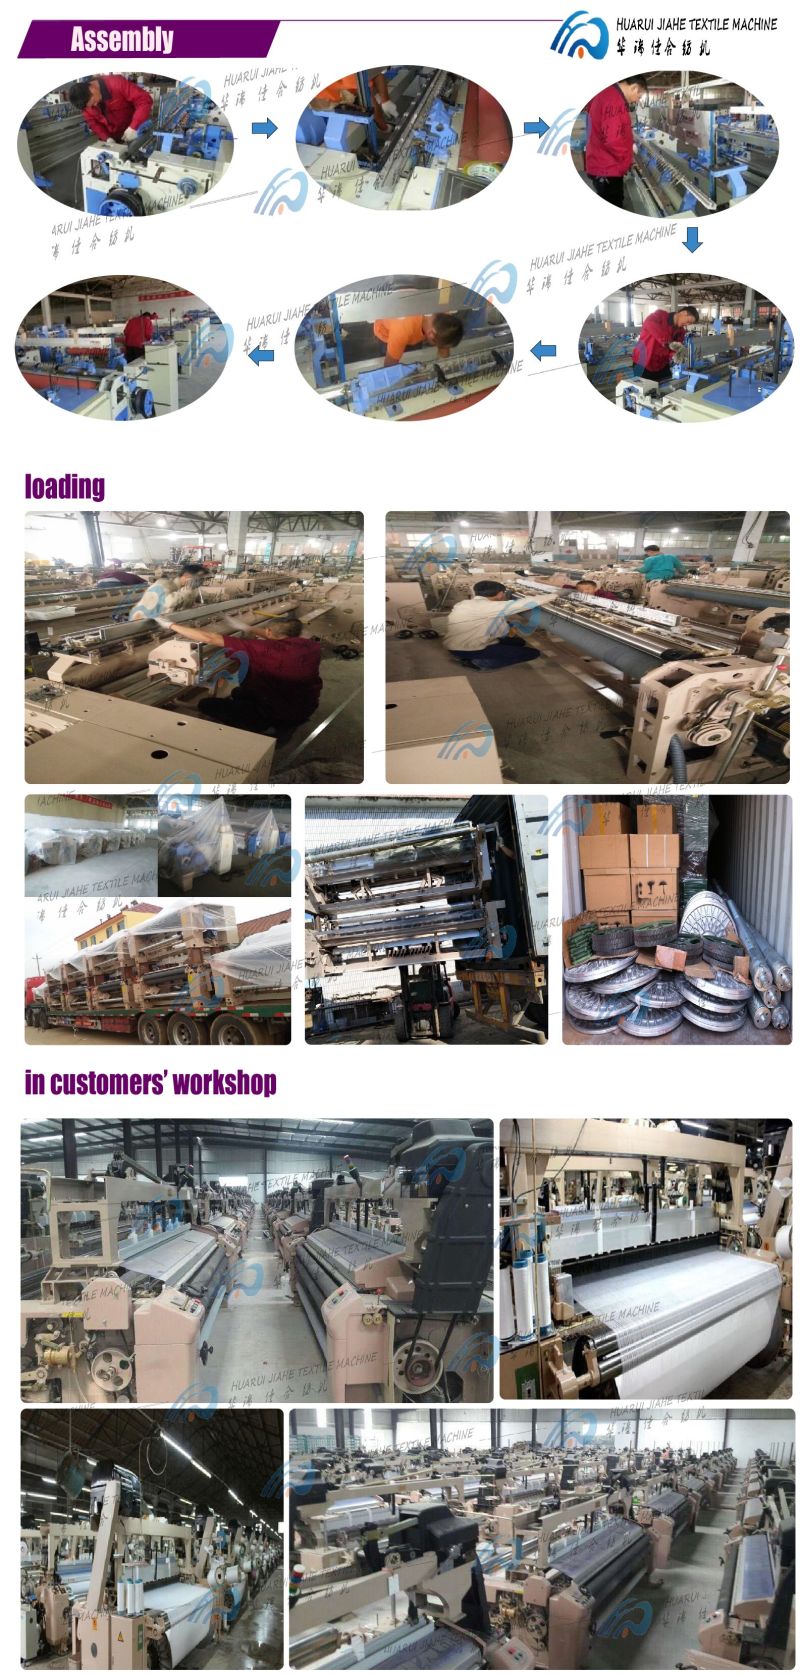 Water-Jet-Loom for Leno Weave (onion bags) Woven Polypropylene Bags Machine Woven Polypropylene Bags 1 Ton Bags Manufacturing Machine.